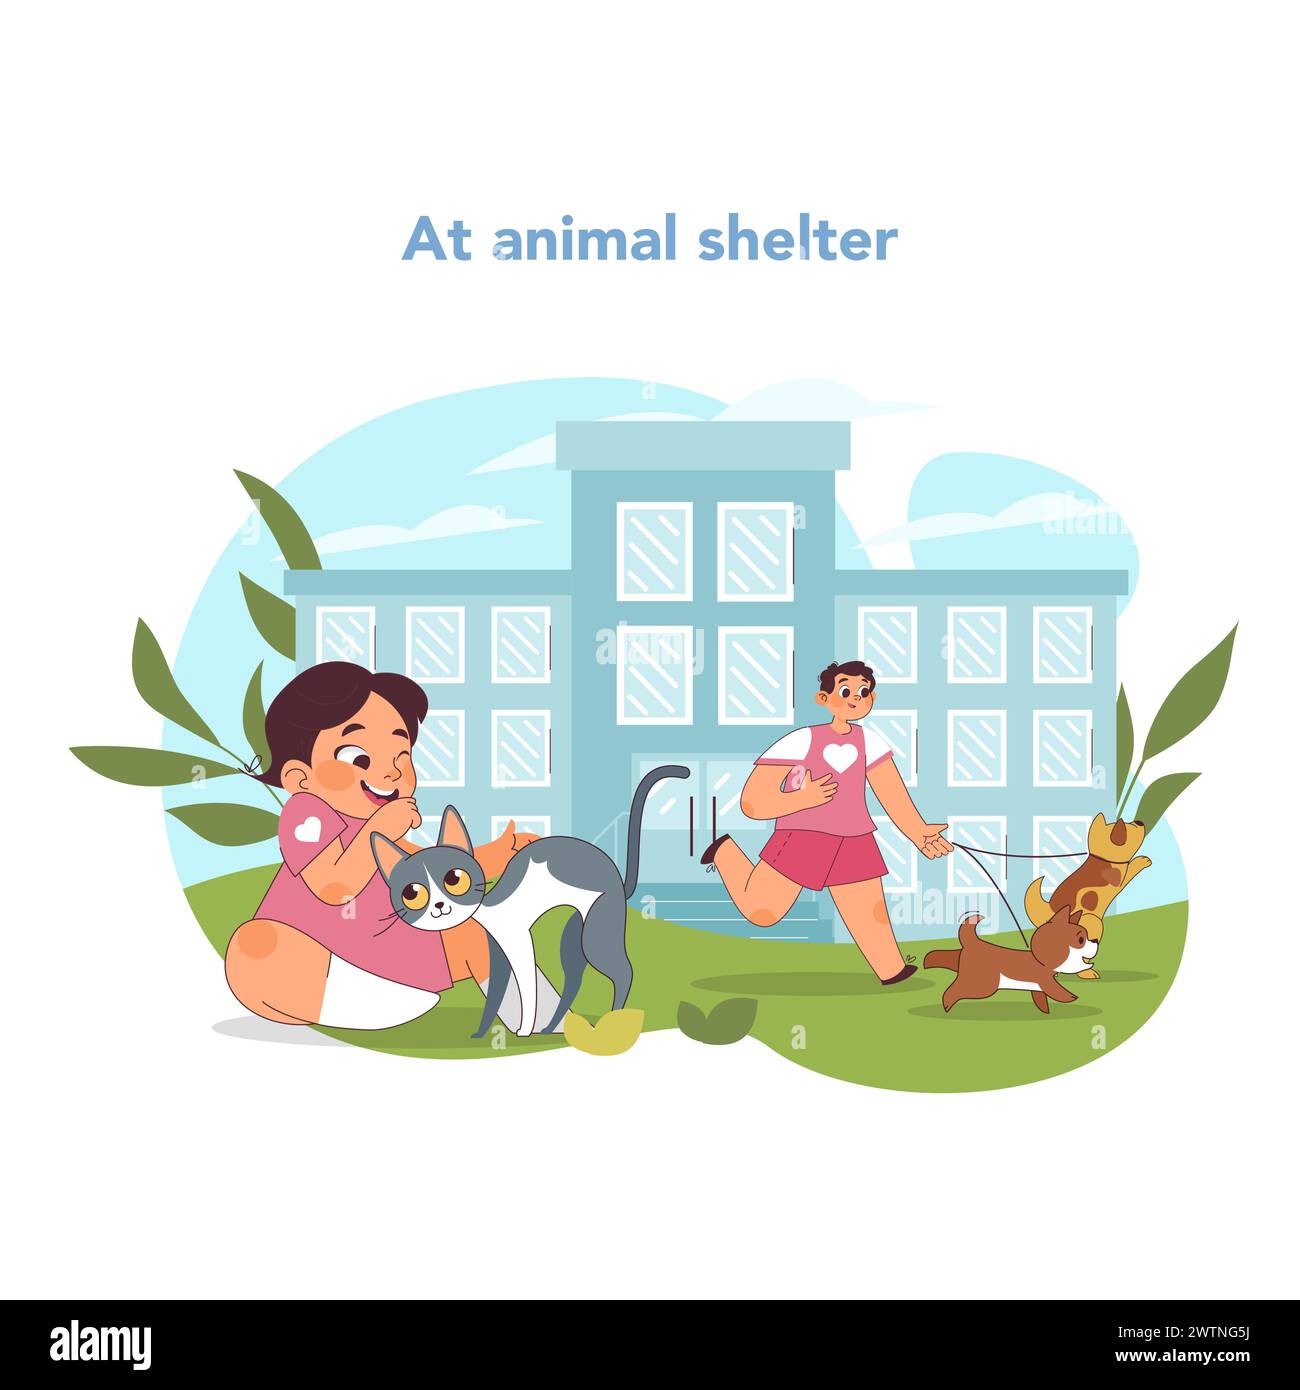 Animal welfare concept. Joyful children volunteer at shelter, nurturing and playing with pets awaiting adoption. Compassion meets care. Helping abandoned animals in need. Vector illustration Stock Vector